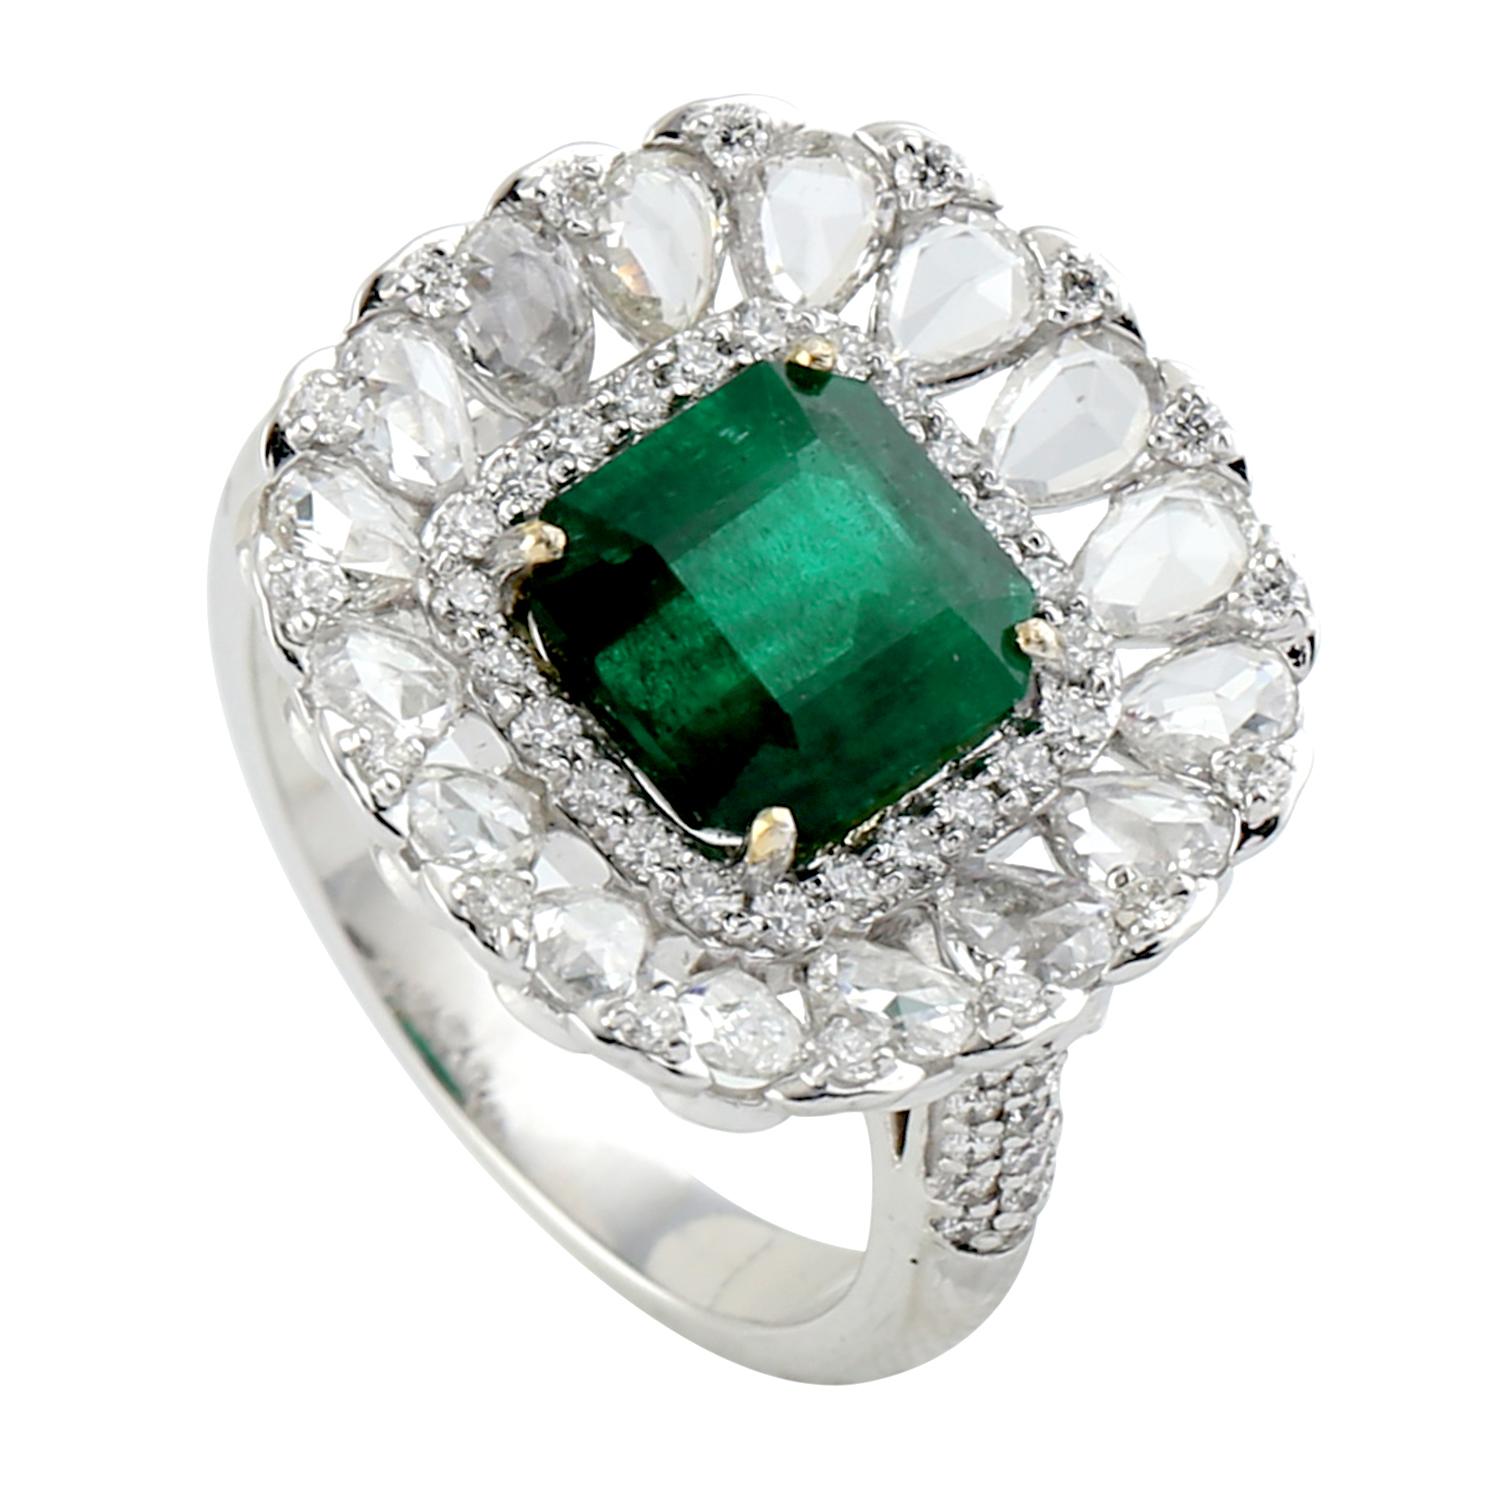 Princess Cut Emerald Ring with Diamonds Around in 18K White Gold In New Condition For Sale In New York, NY